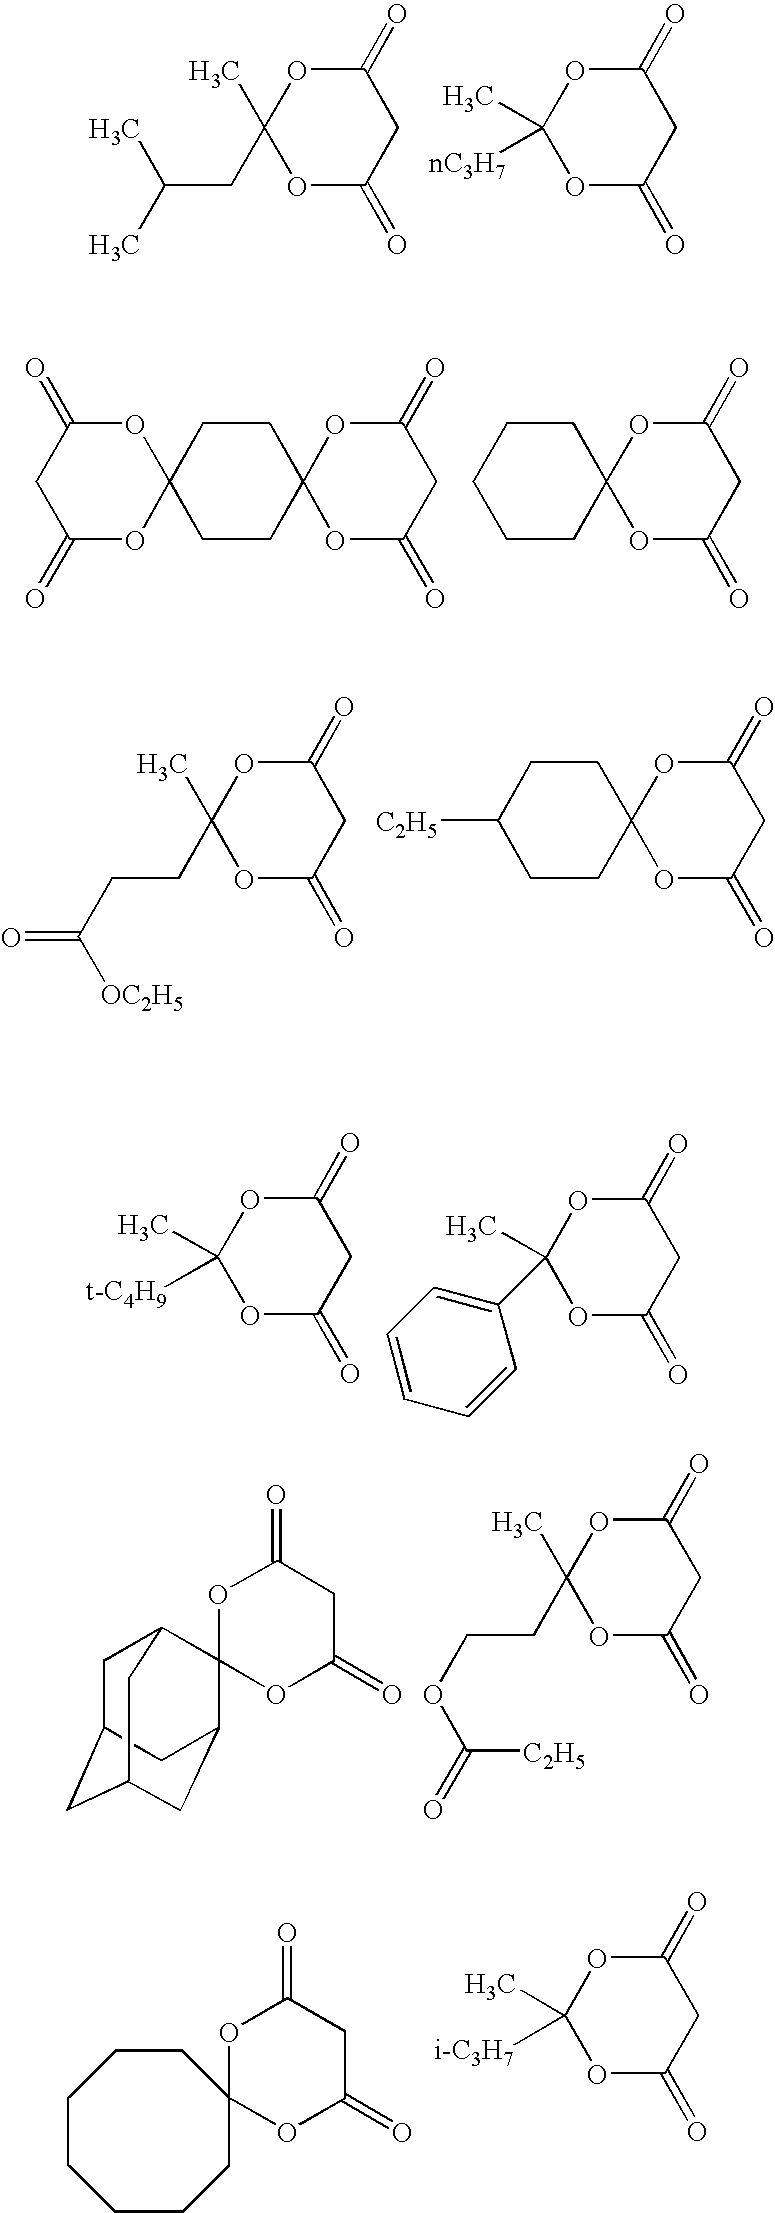 Method for producing 1,3-dioxolan-4,6-dione compound